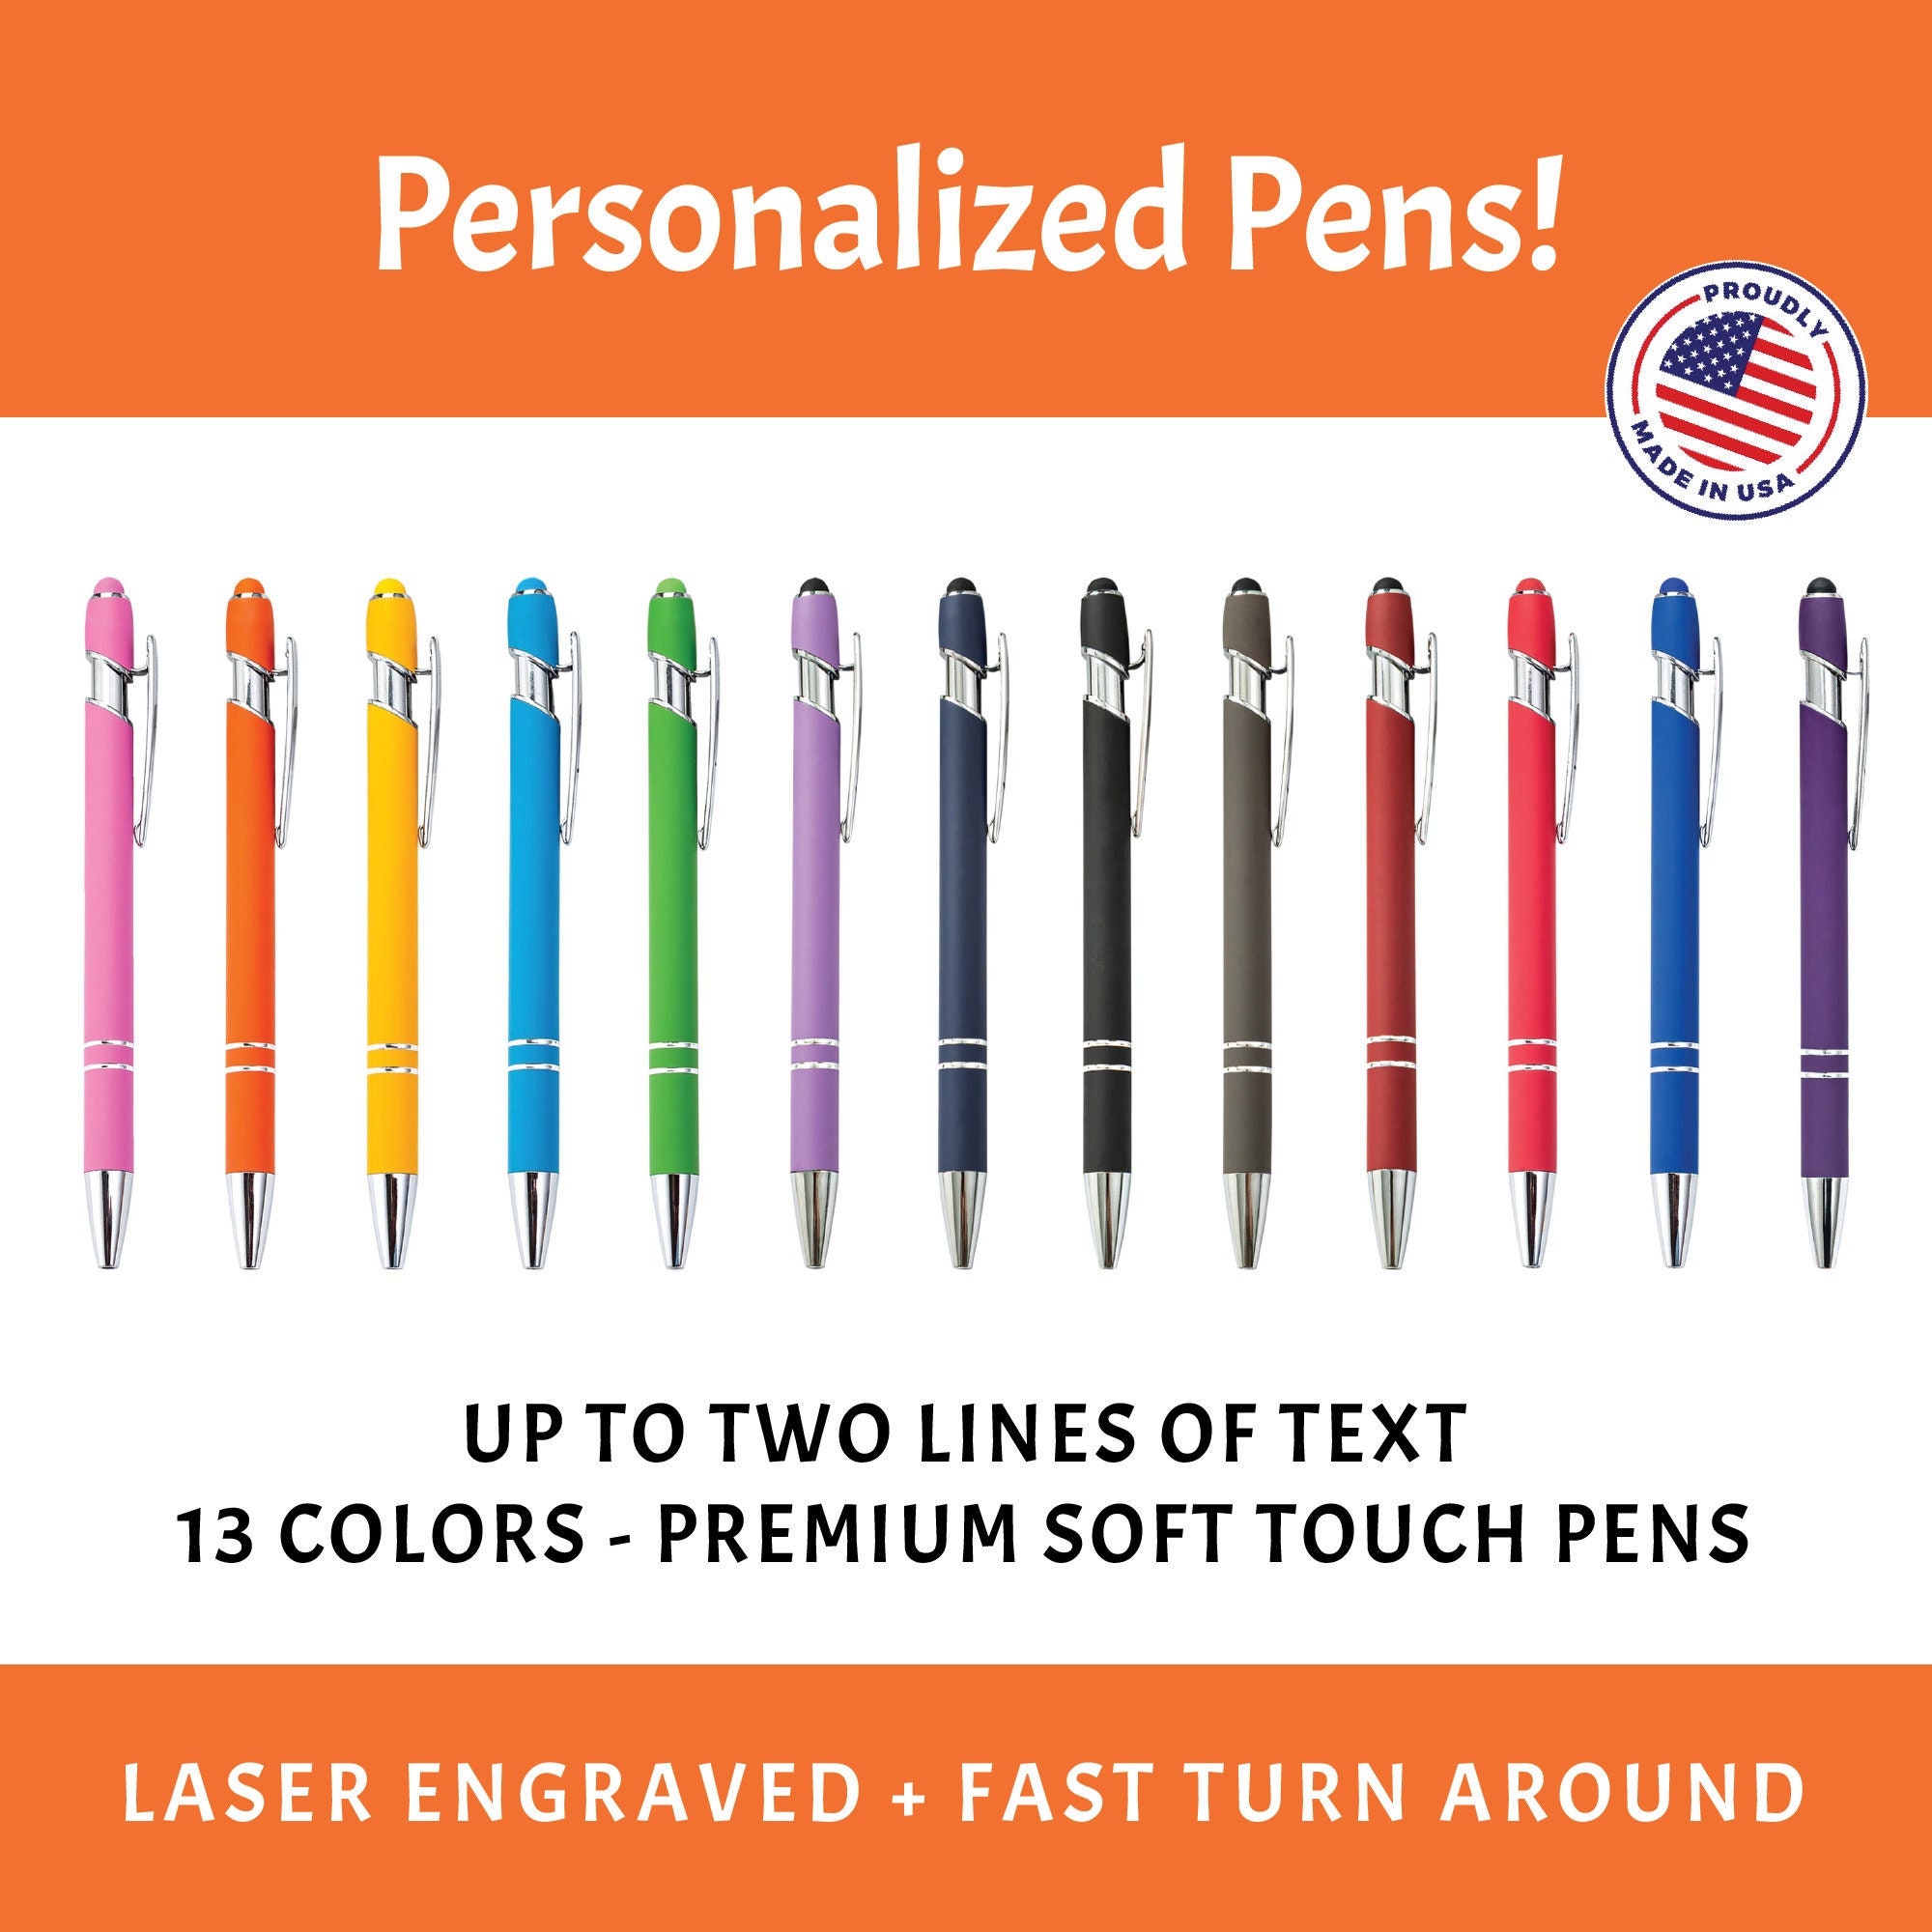 Custom Rose Gold Pens, Personalized Business Pens, Bulk Custom Pens,  Promotional Pens, Customized Ballpoint Pens 